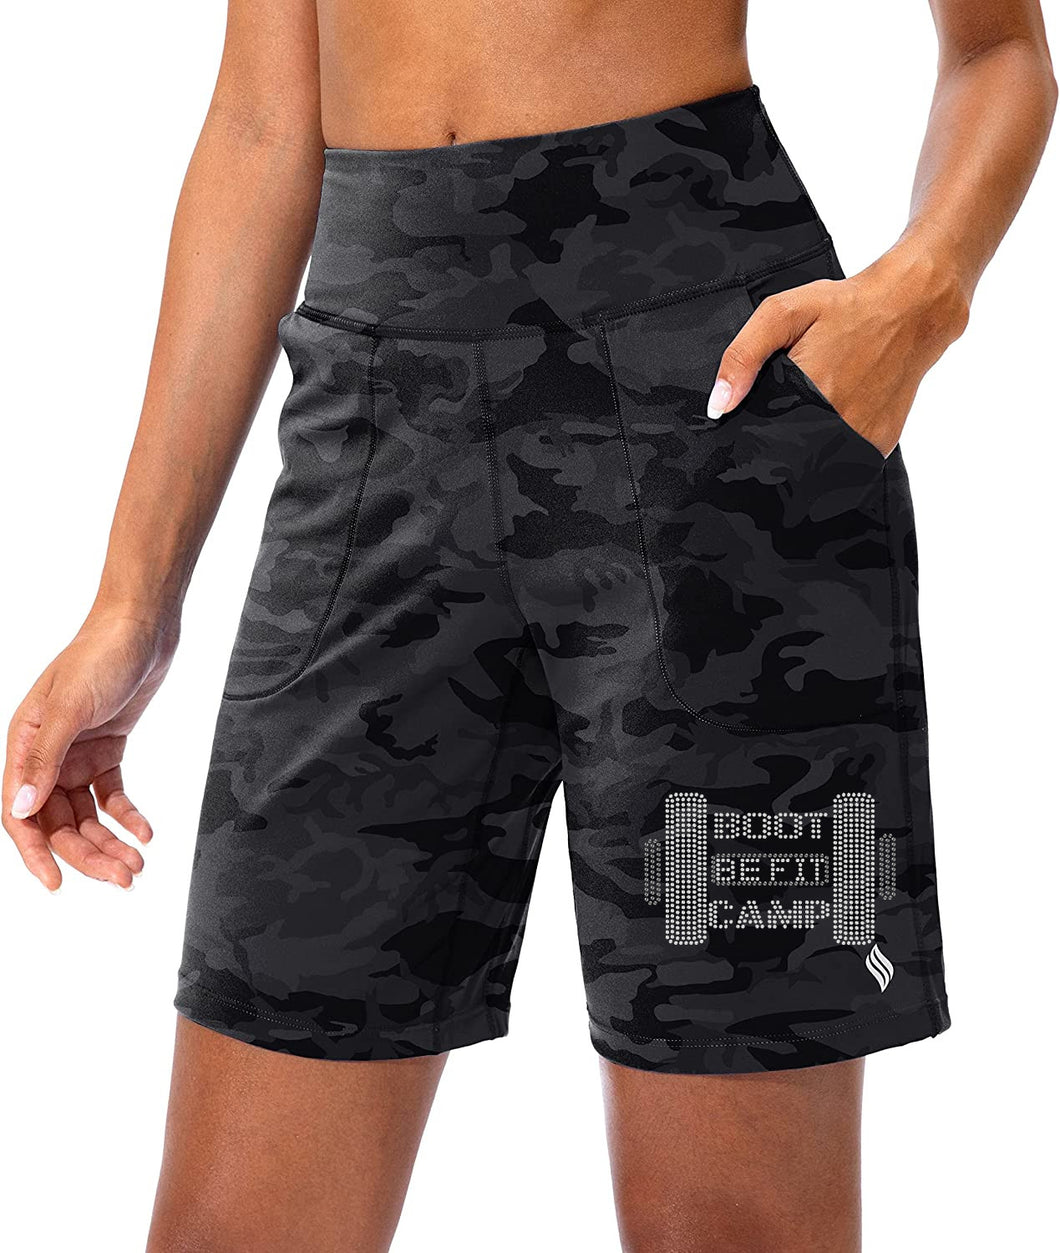 BE FIT BOOTCAMP | FUN FITNESS BLING Women's Tummy Control Bermuda Short BLACK CAMO Collection